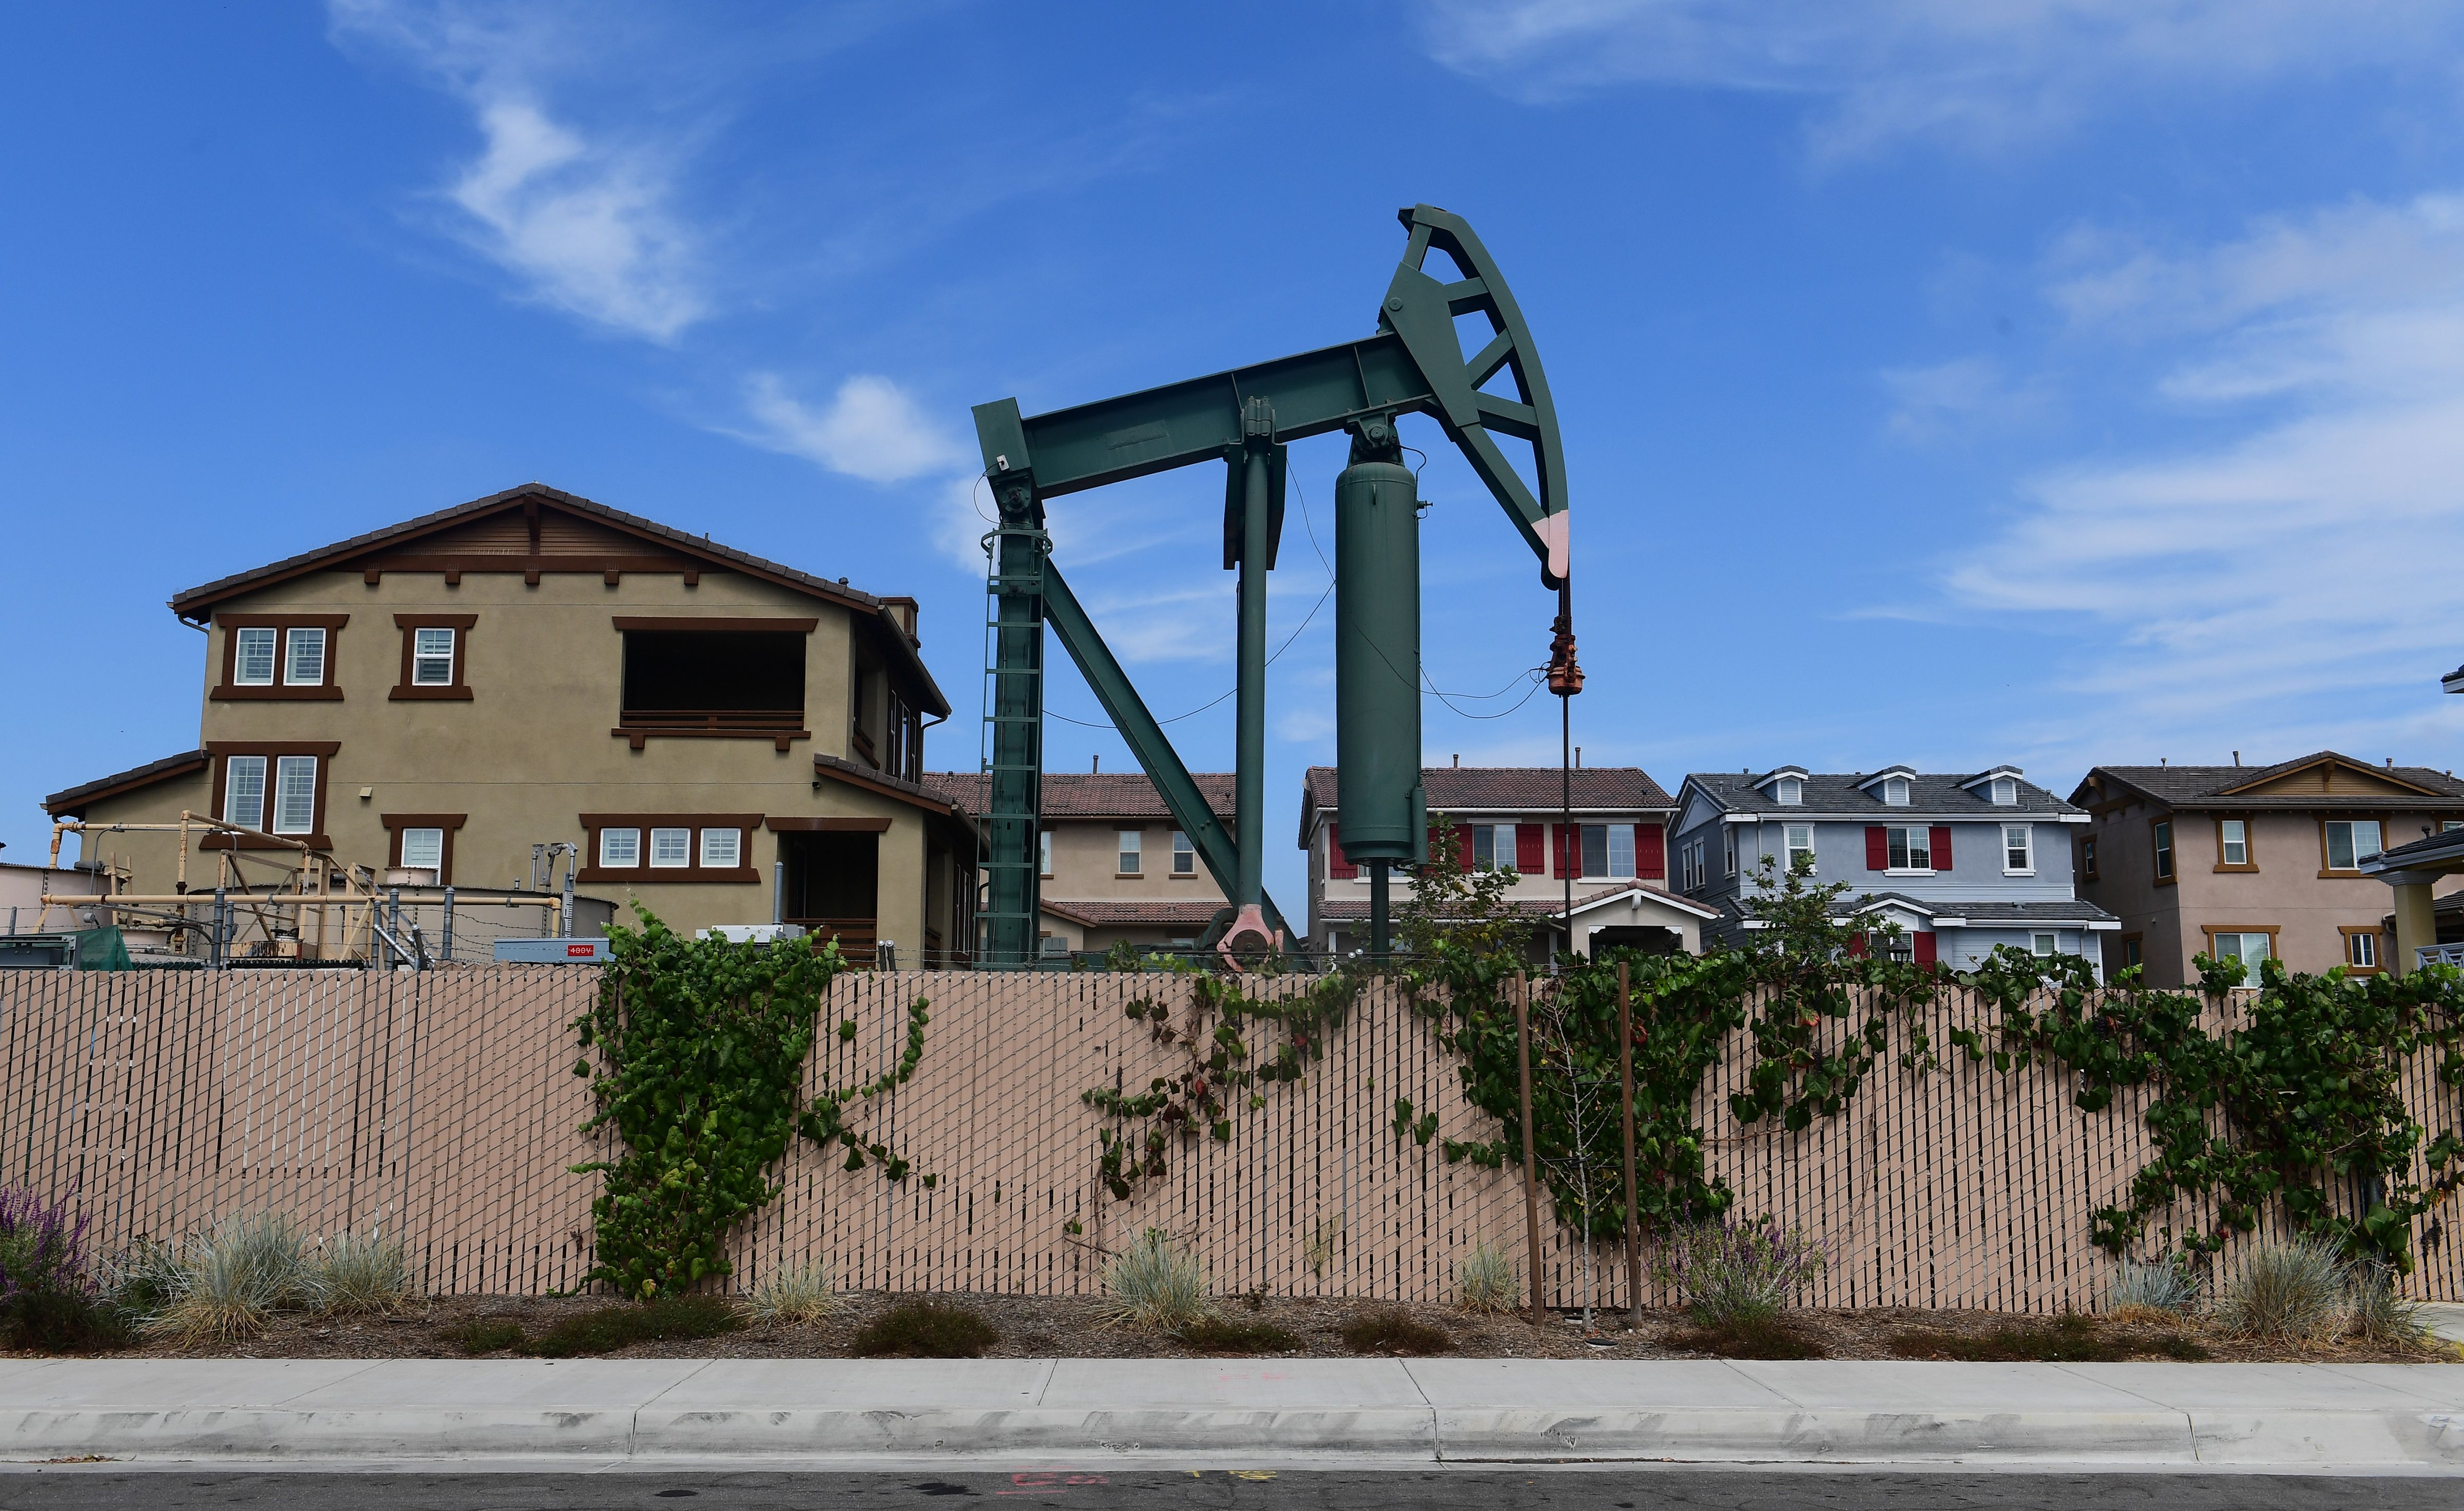 A pumpjack stands out among homes in residential Signal Hill, south of Los Angeles, California, on September 25, 2019 where oil has been pumped since the 1920's.